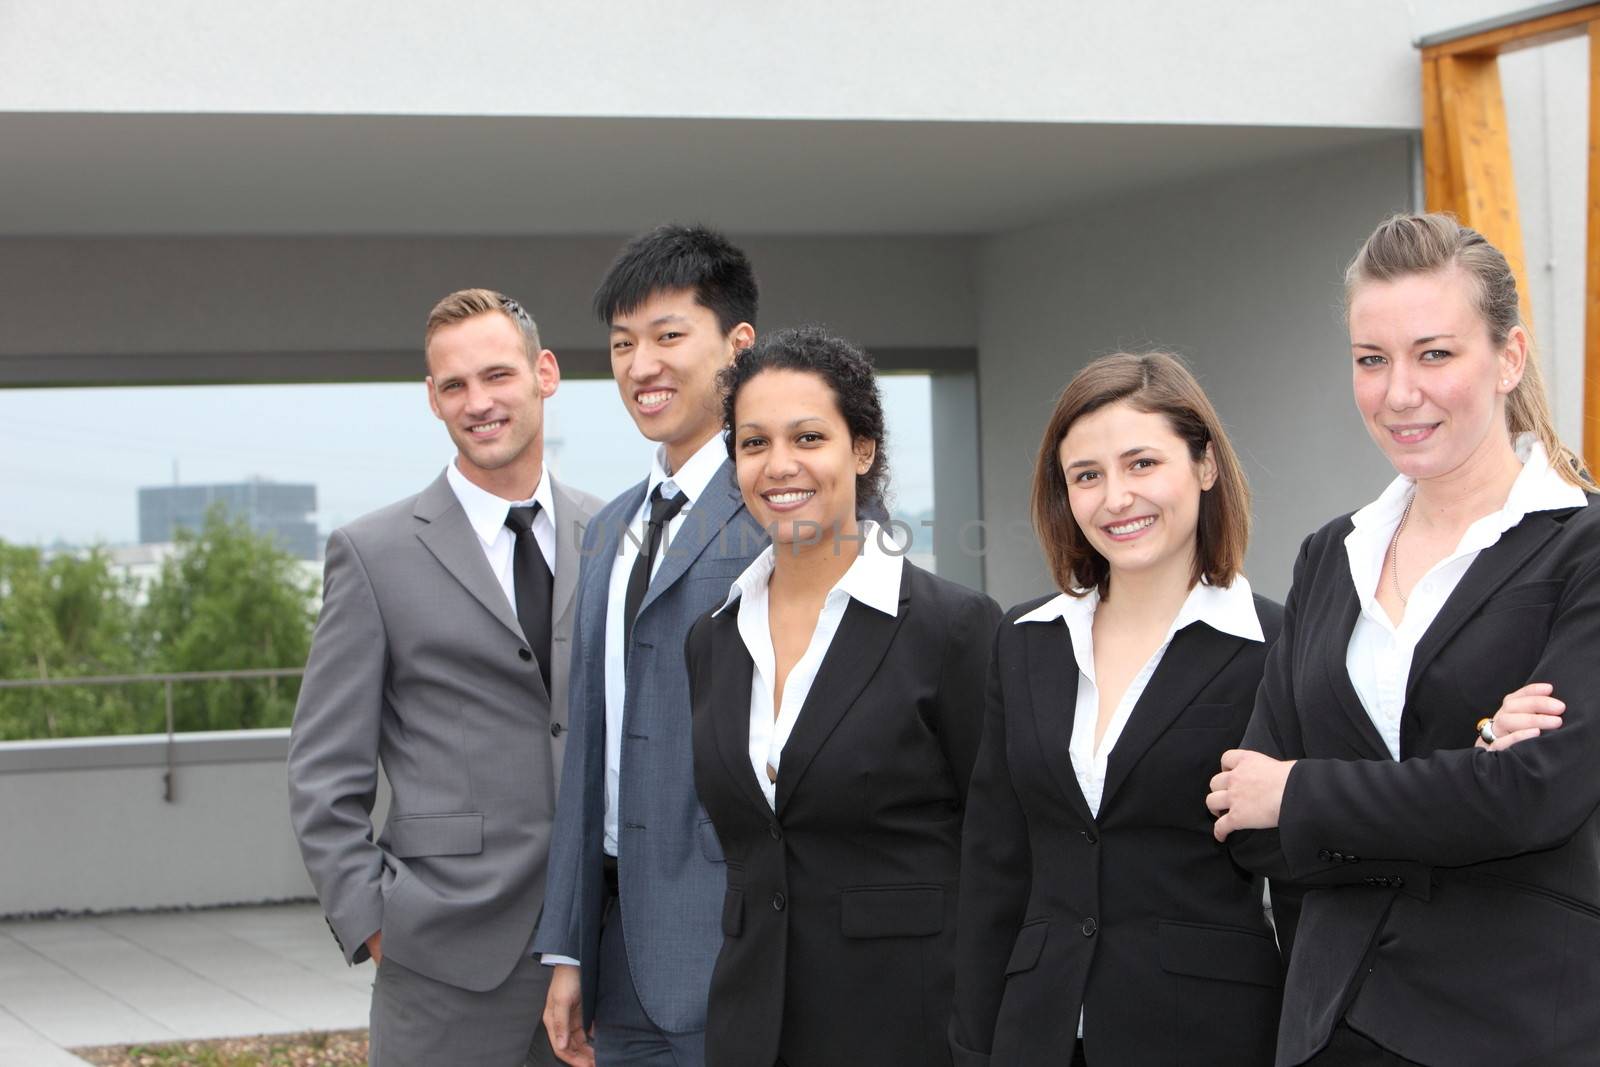 Confident business team standing together outdoors by Farina6000